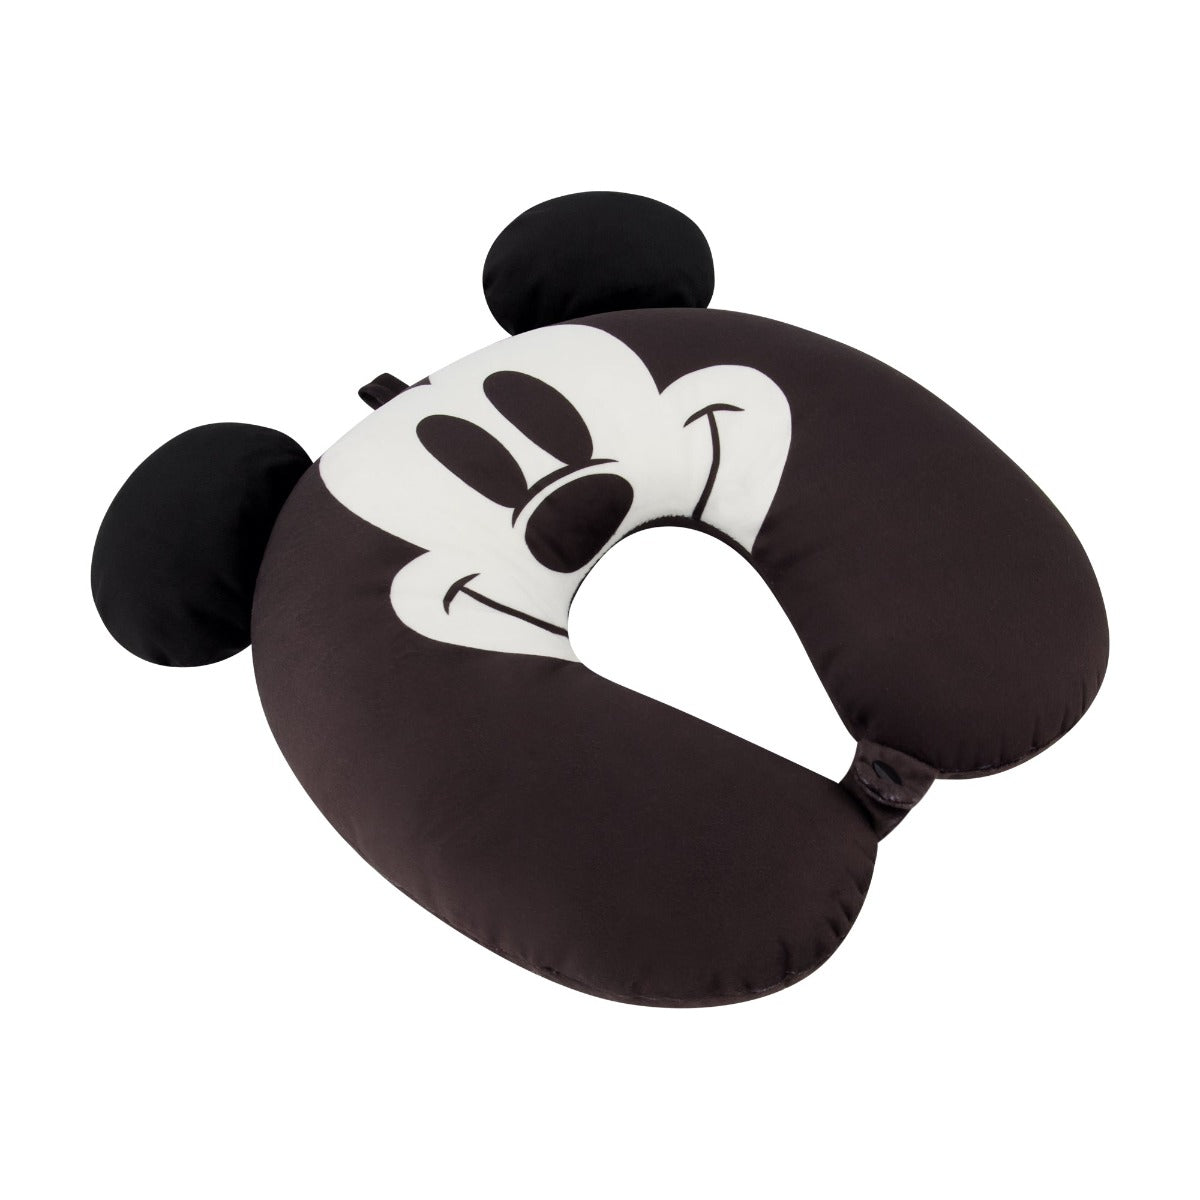 Black Ful Disney Mickey Mouse neck pillow with ears - best travel pillows for adults and kids